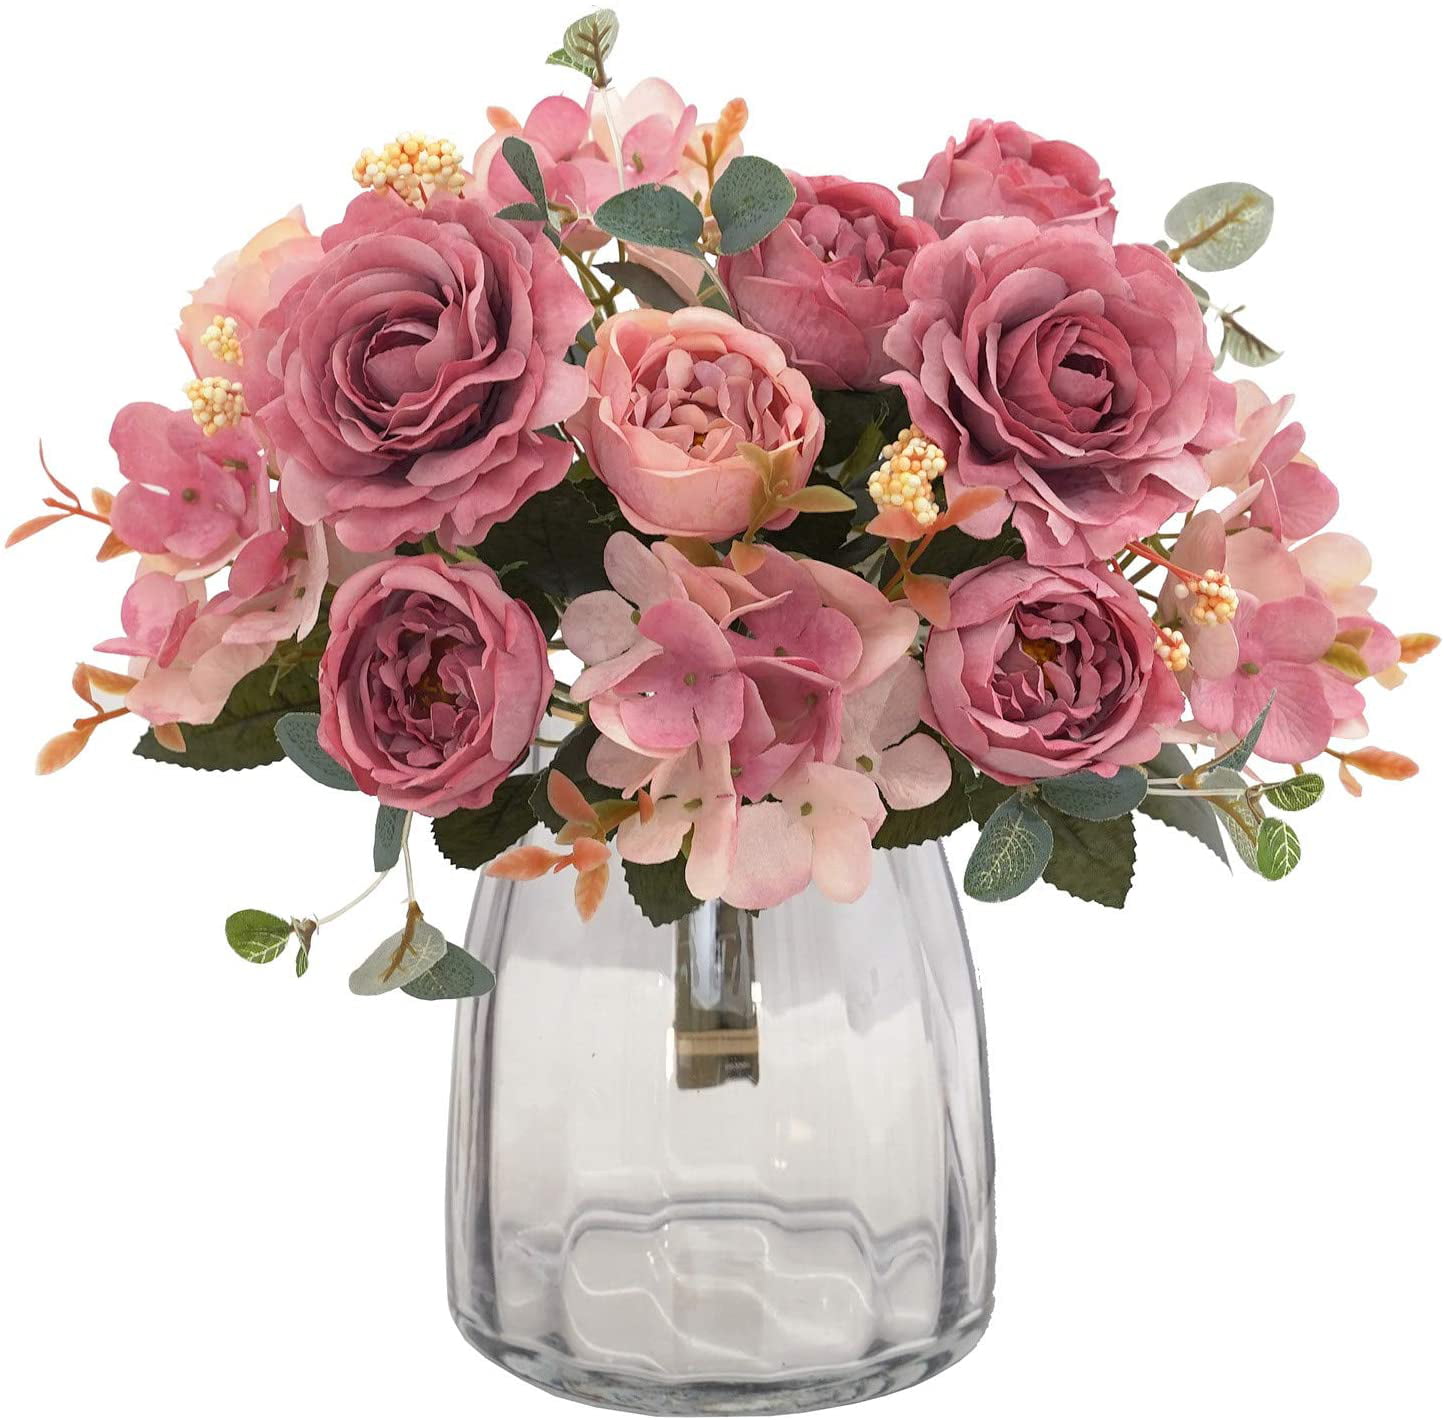 Artificial realistic flowers bunch in vase wedding decor 